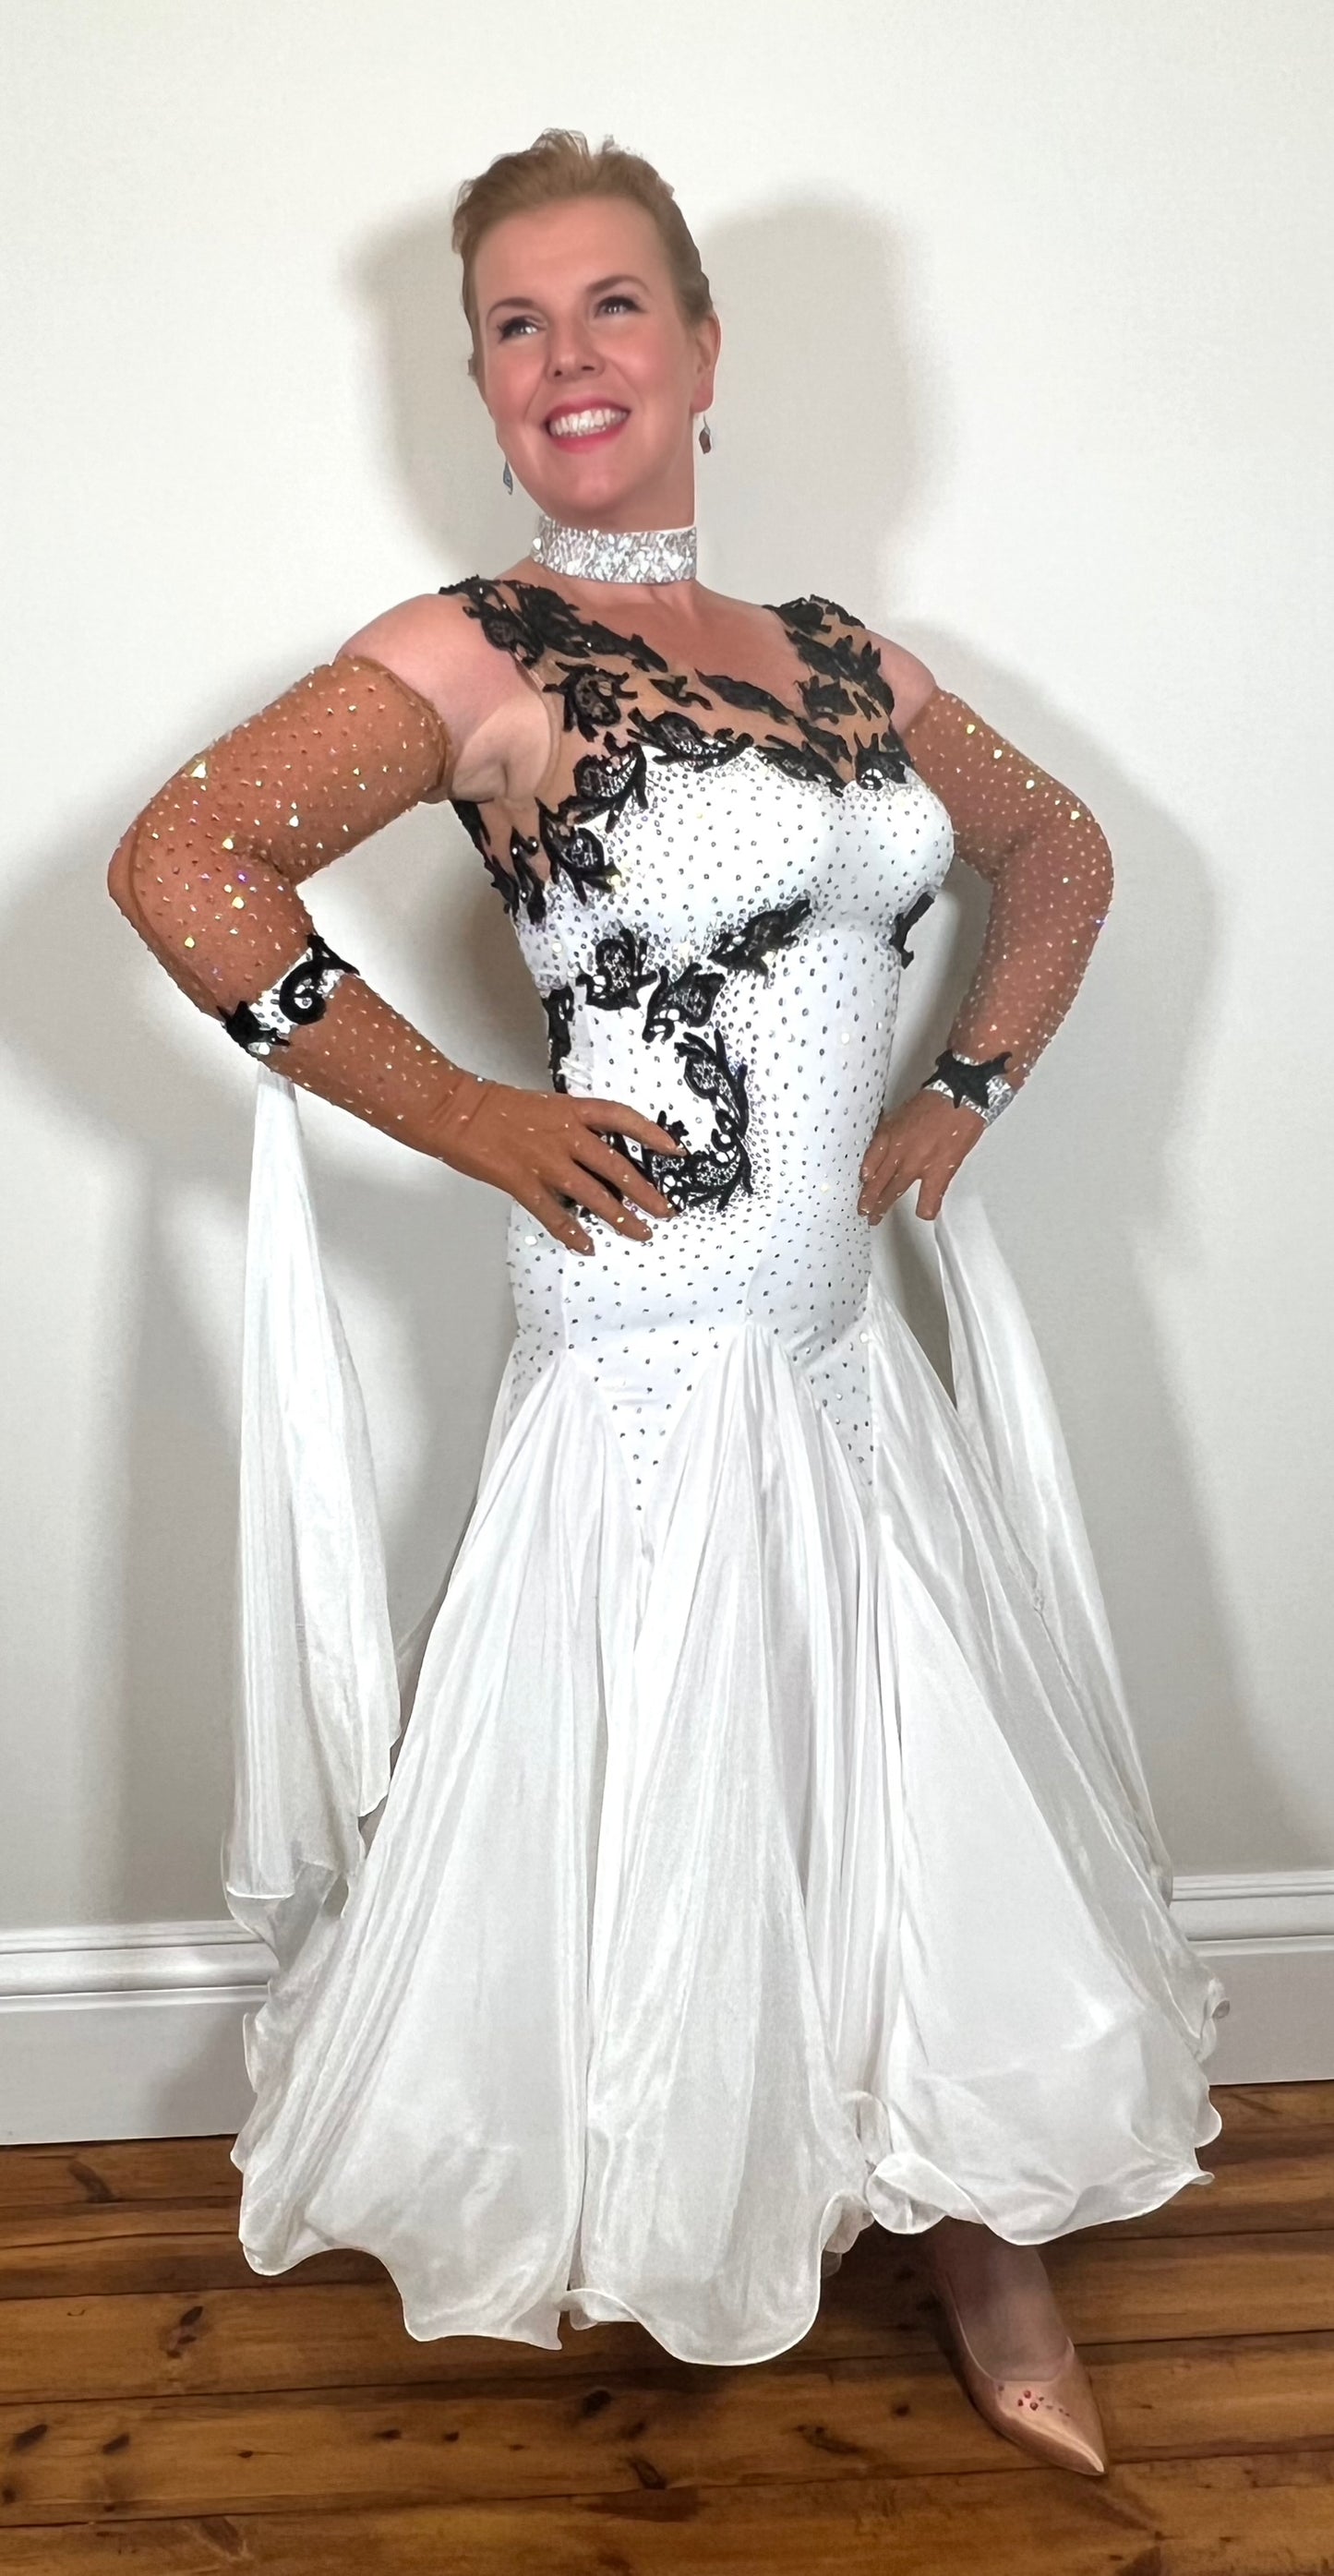 048 White Ballroom Dress with Black lace detailing to the upper chest & sides. Comes with x2 cuffs decorated with appliqué. Stoned in AB and Jet